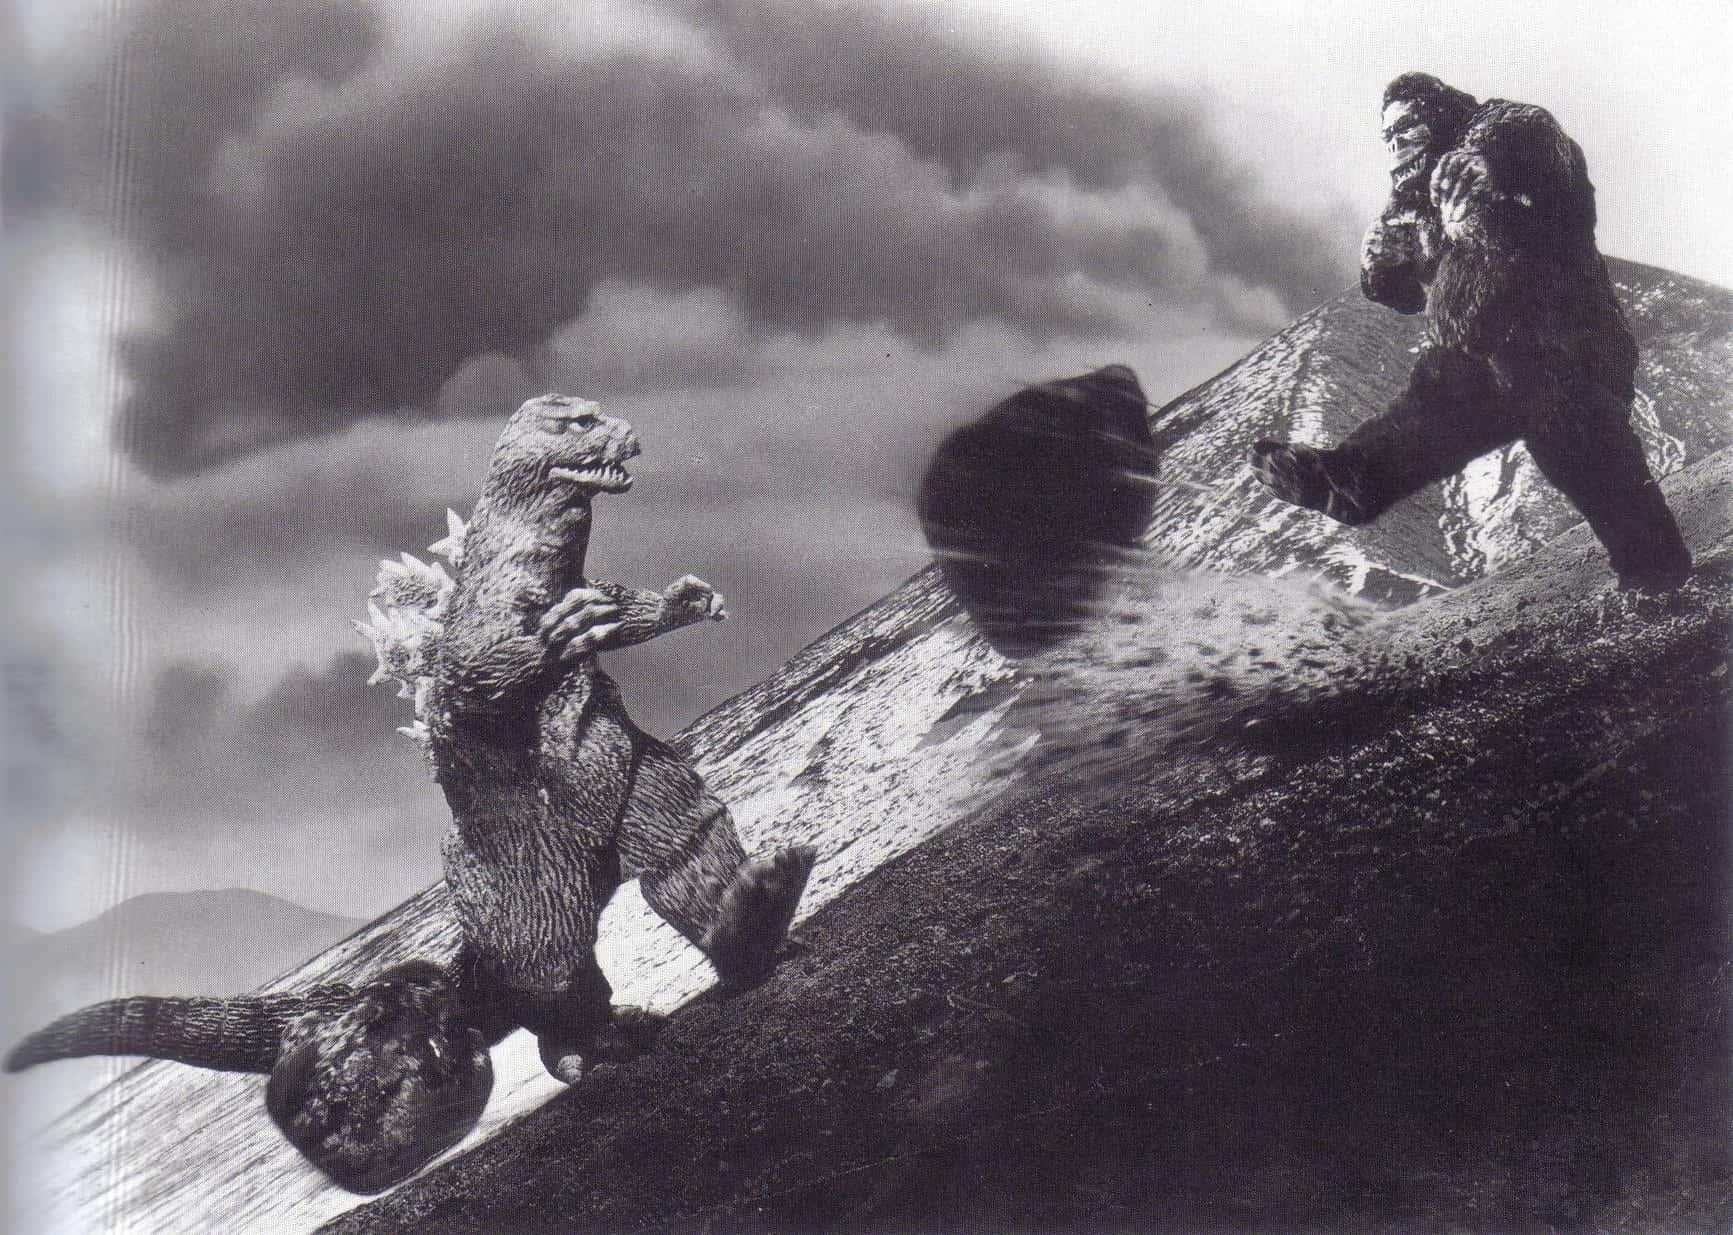 Godzilla and Kong face off in an epic battle